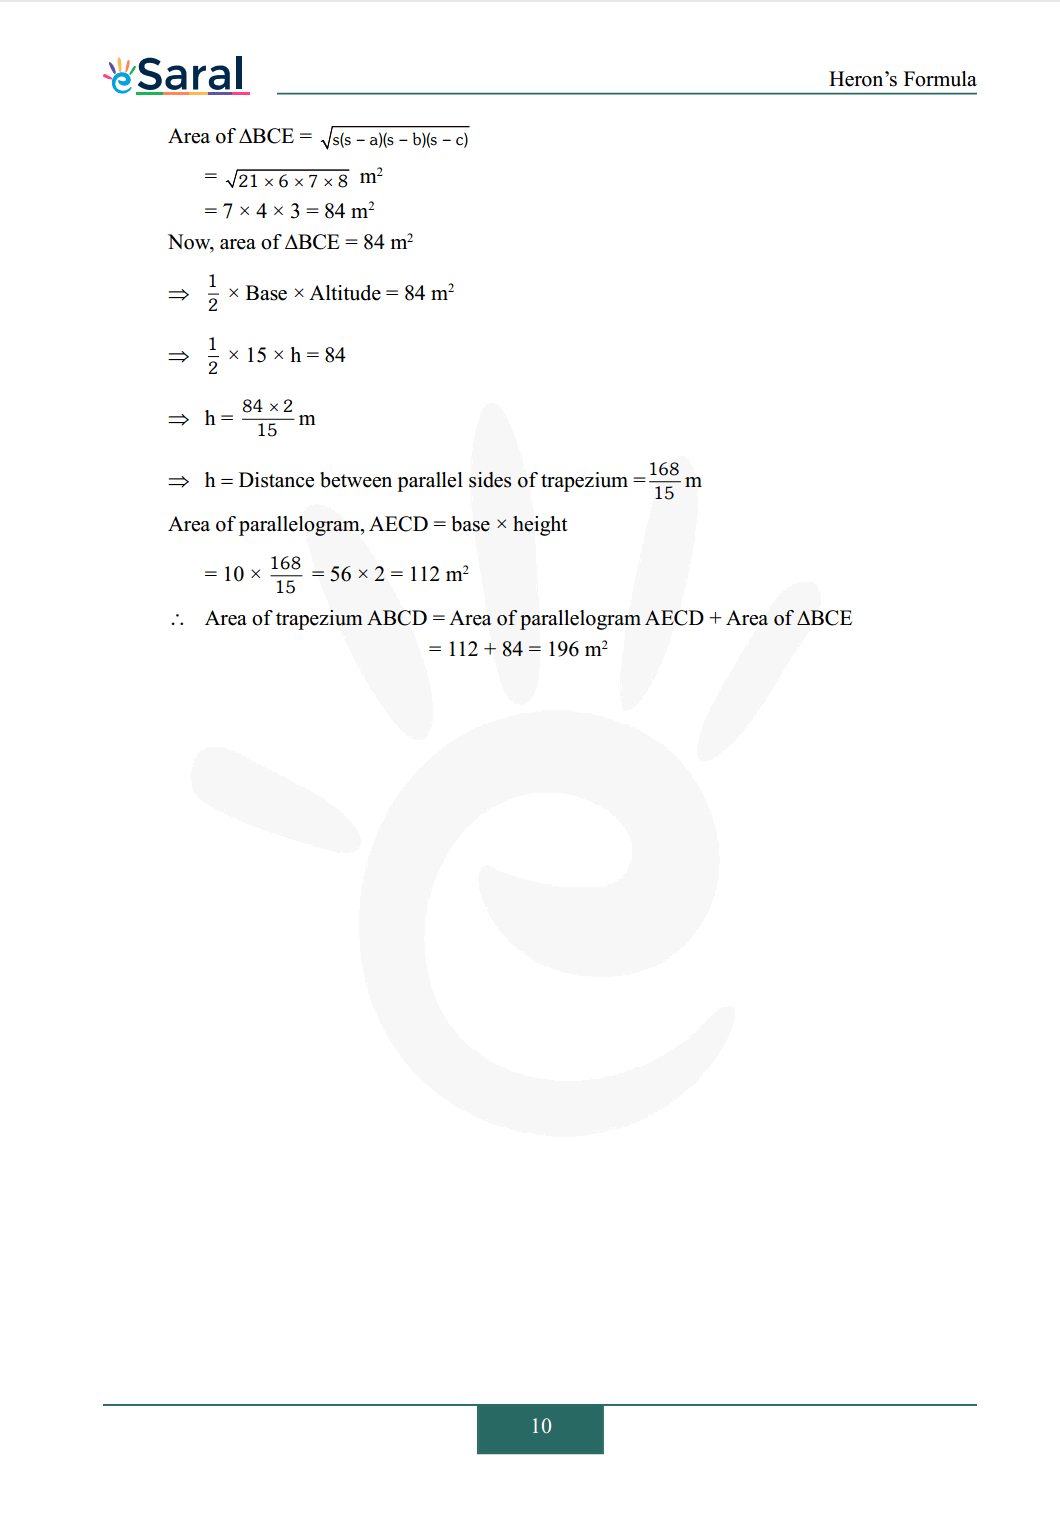 Class 9 maths chapter 12 exercise 12.2 solutions Image 7